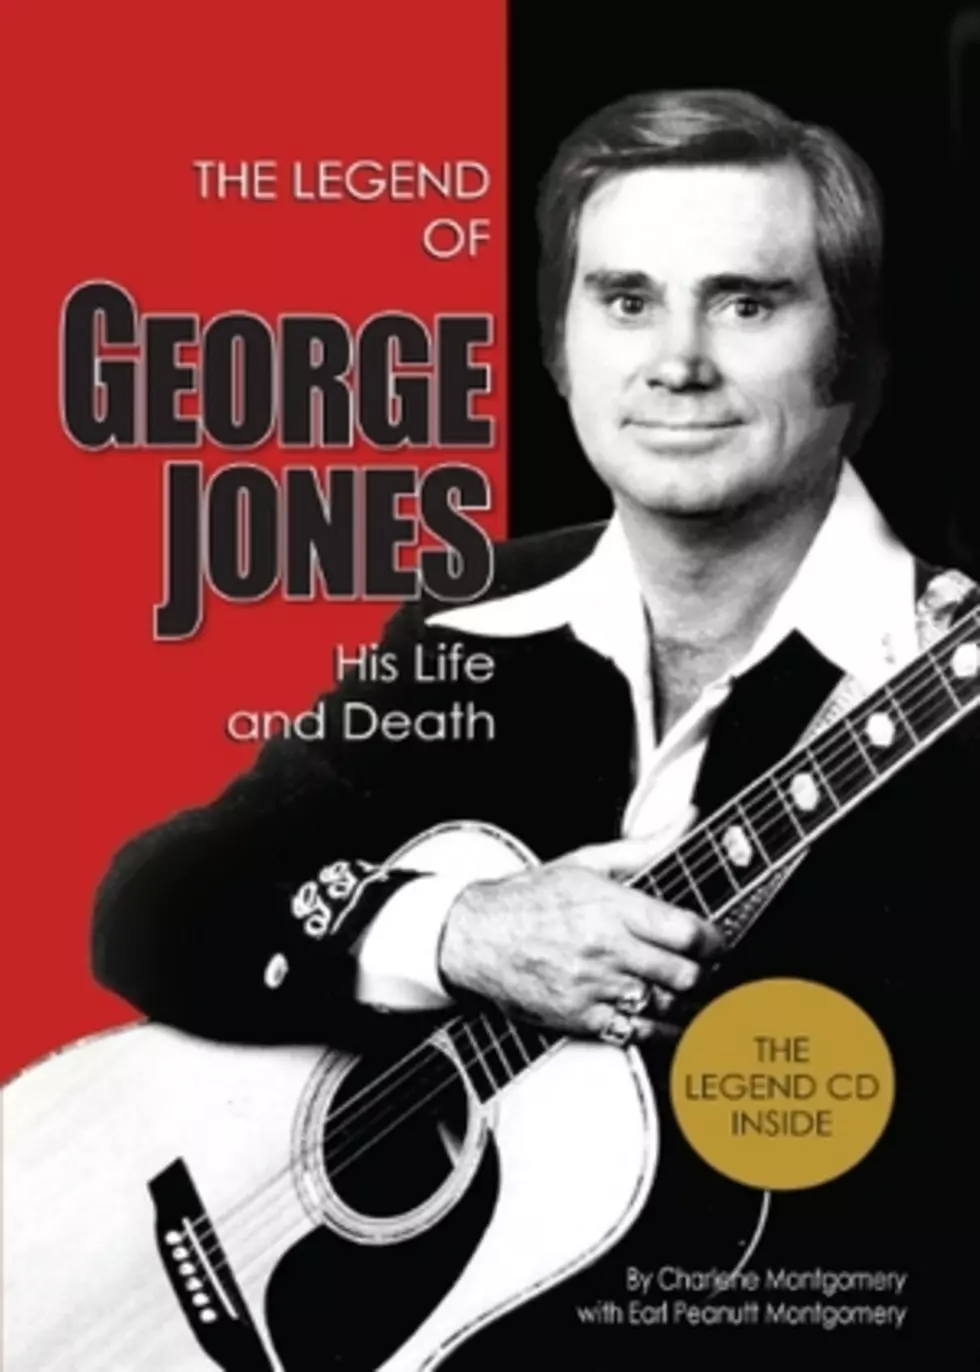 George Jones Remembered in New Biography